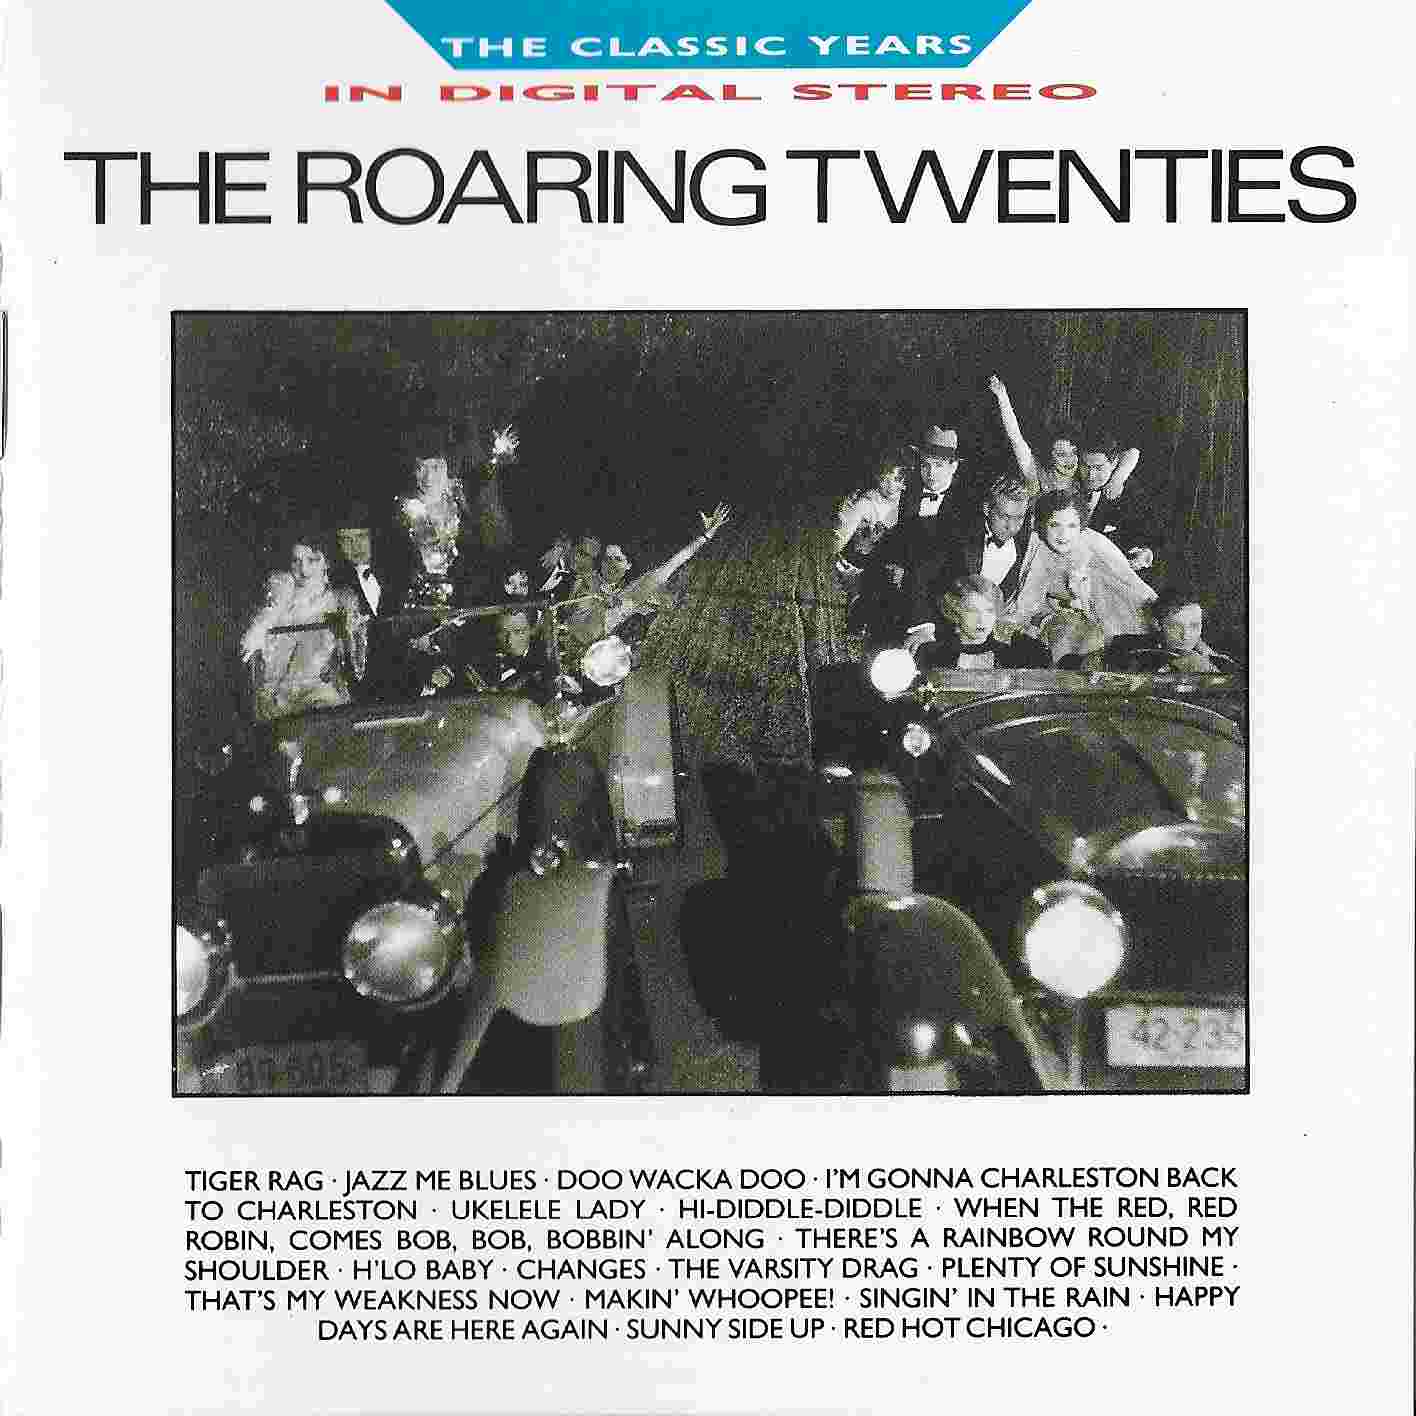 Picture of BBCCD704 Classic years - The roaring twenties by artist Various from the BBC cds - Records and Tapes library